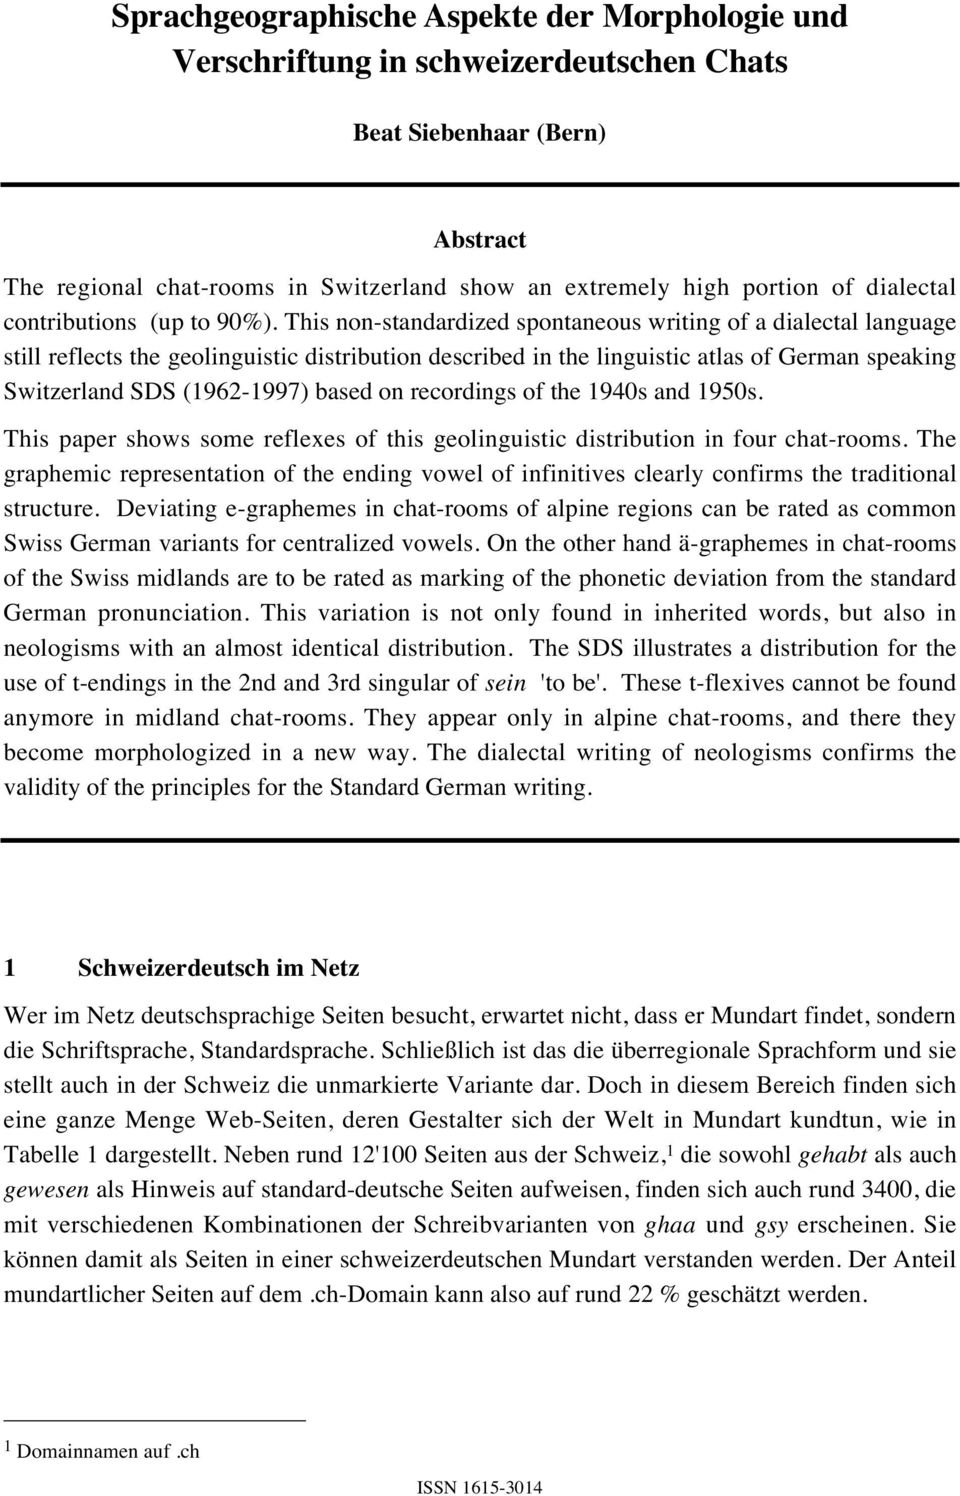 This non-standardized spontaneous writing of a dialectal language still reflects the geolinguistic distribution described in the linguistic atlas of German speaking Switzerland SDS (1962-1997) based